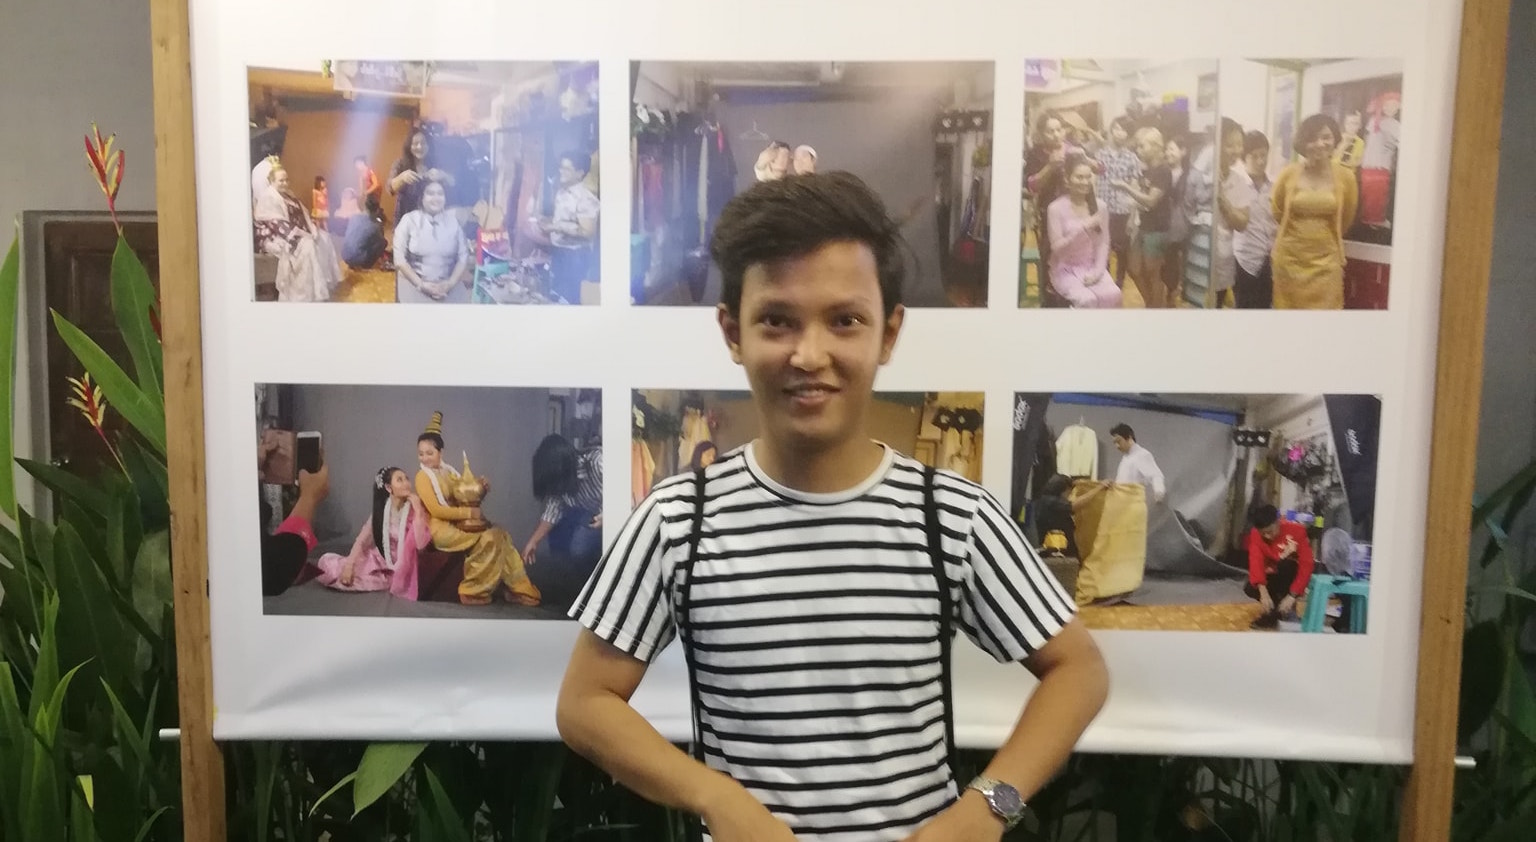 Kyaw Zin Win posing in front of photo exhibit at French Institute via Facebook